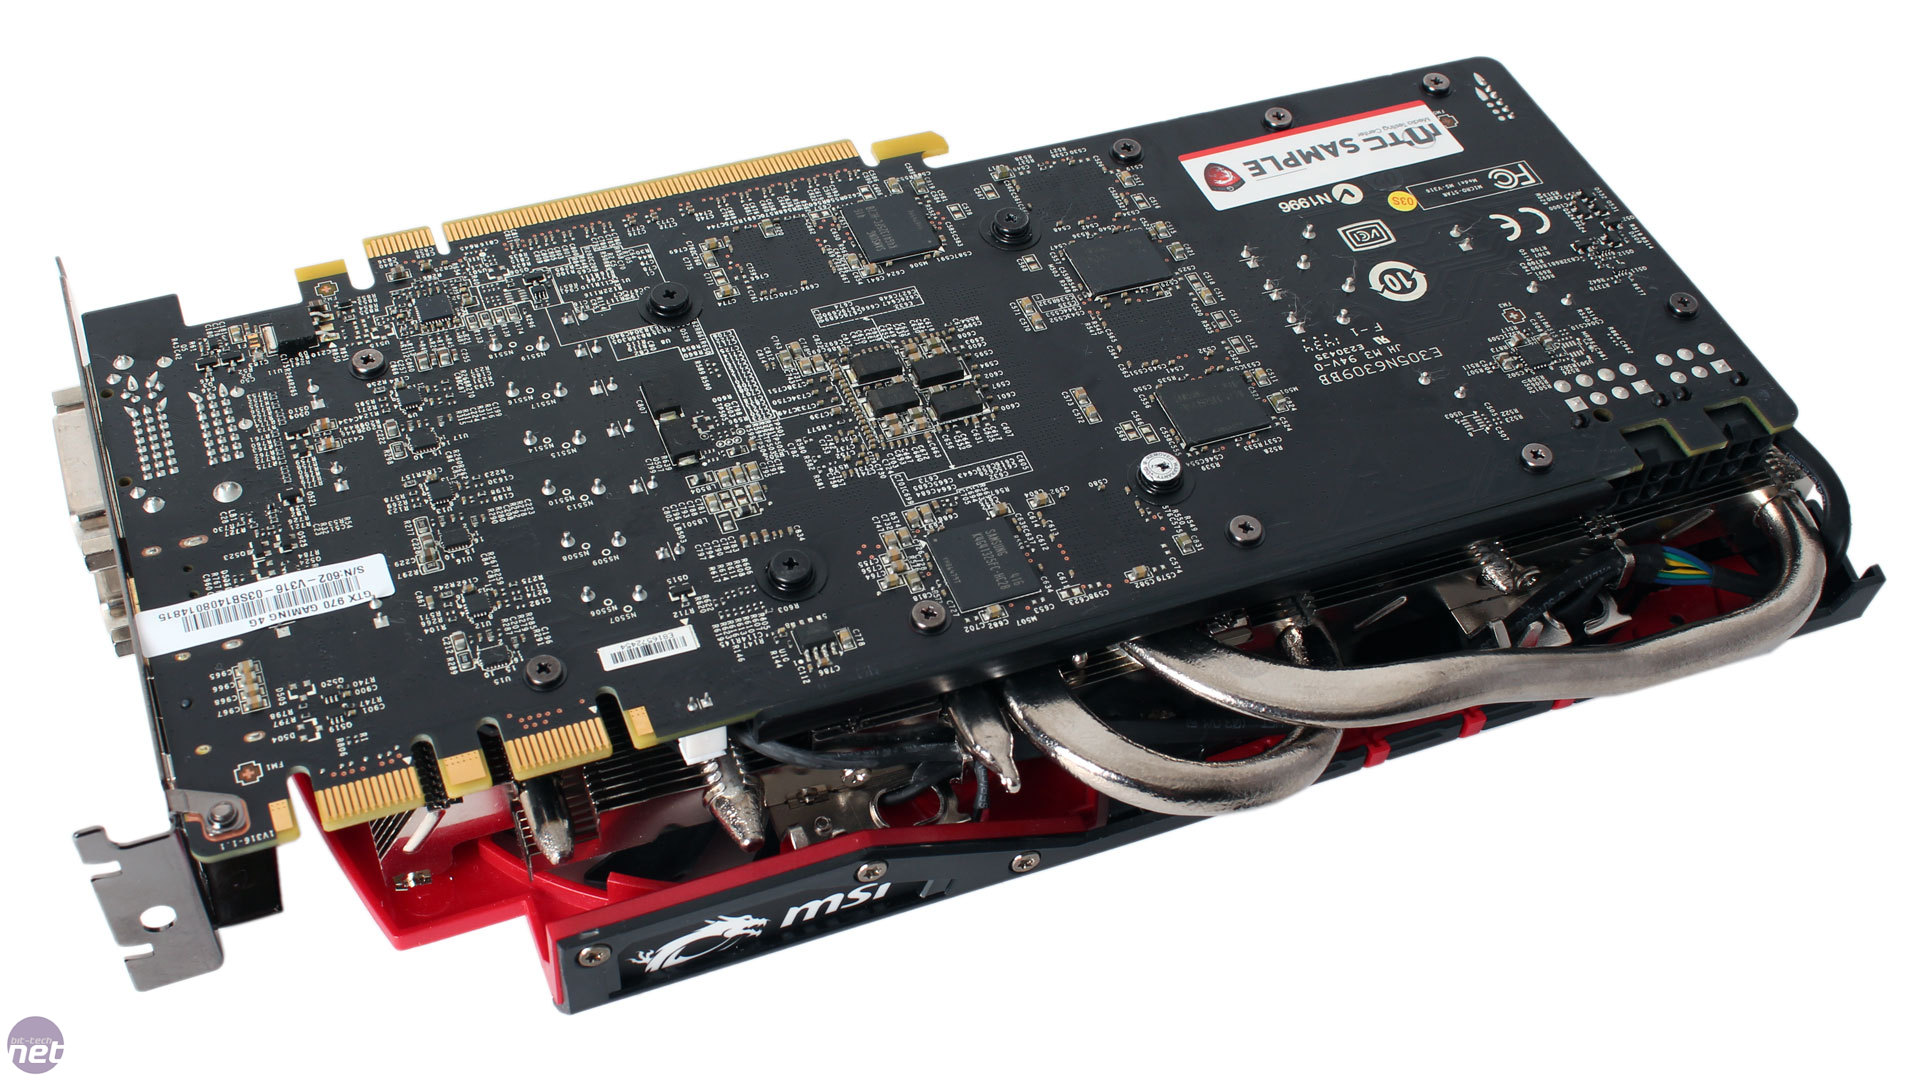 Nvidia GeForce GTX 970 Review Roundup: feat. ASUS, EVGA and MSI